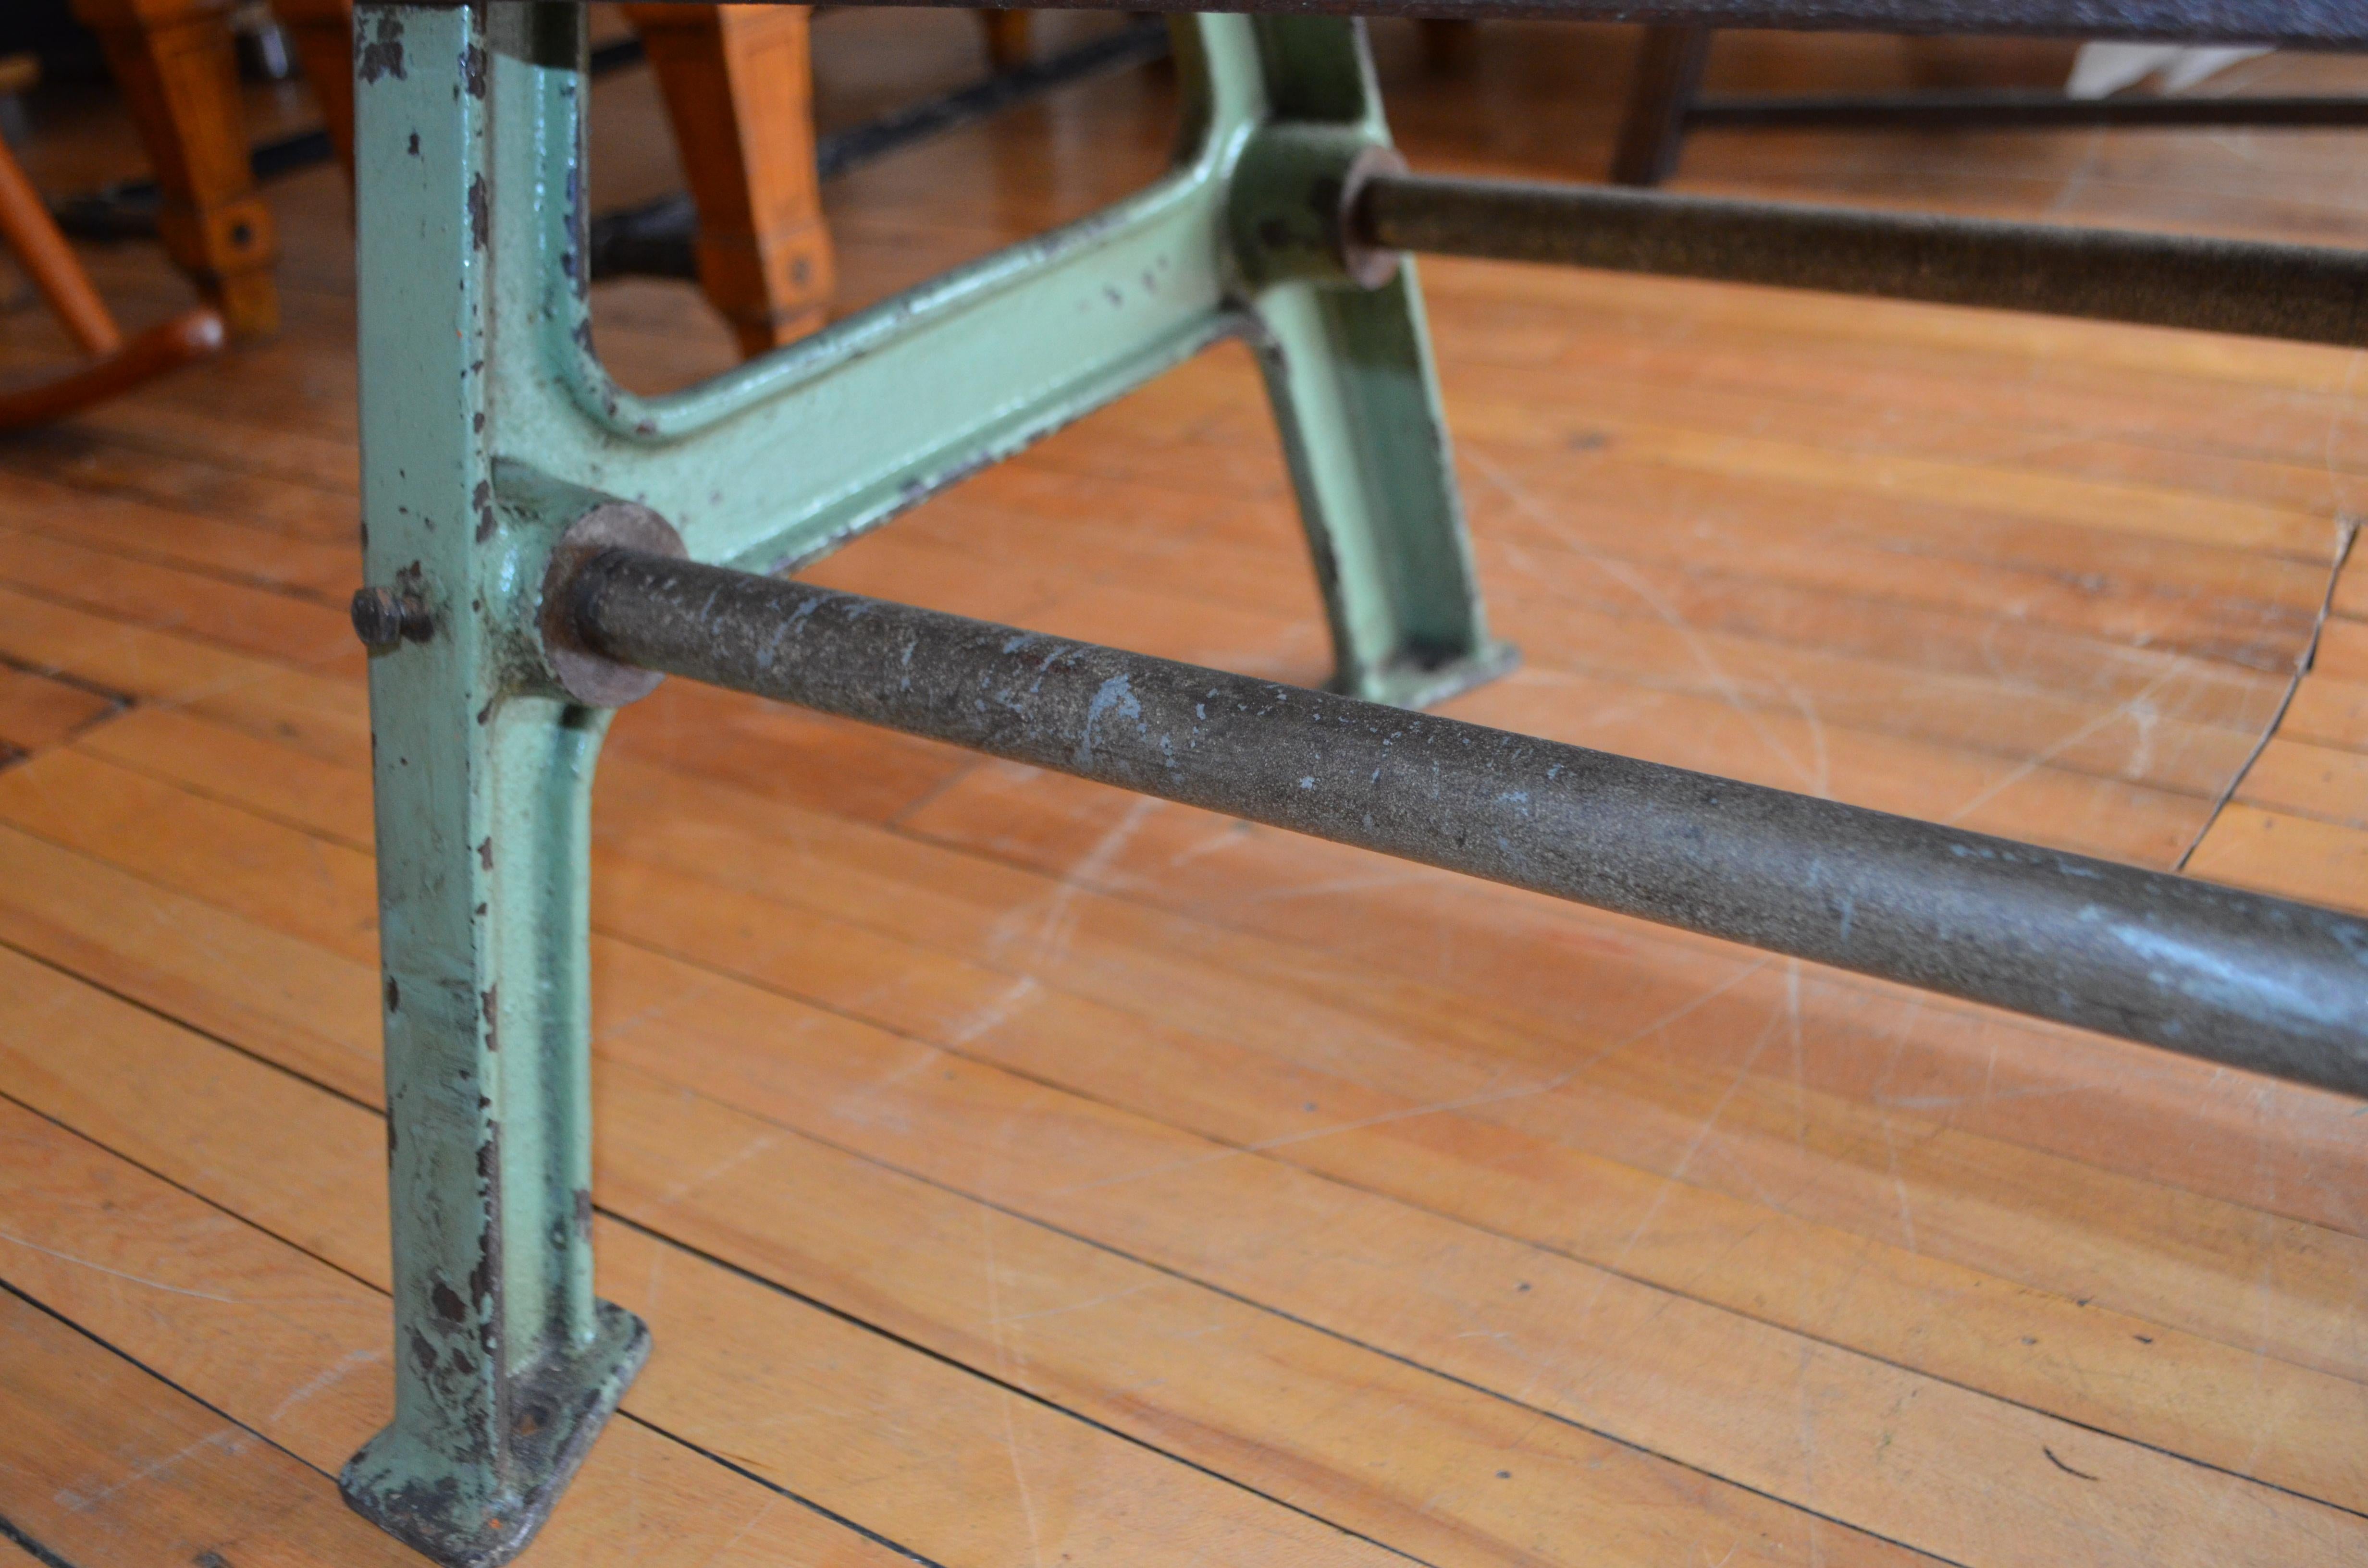 Bench of Suede Leather with Industrial Forged Iron Base, Early 20th Century For Sale 3